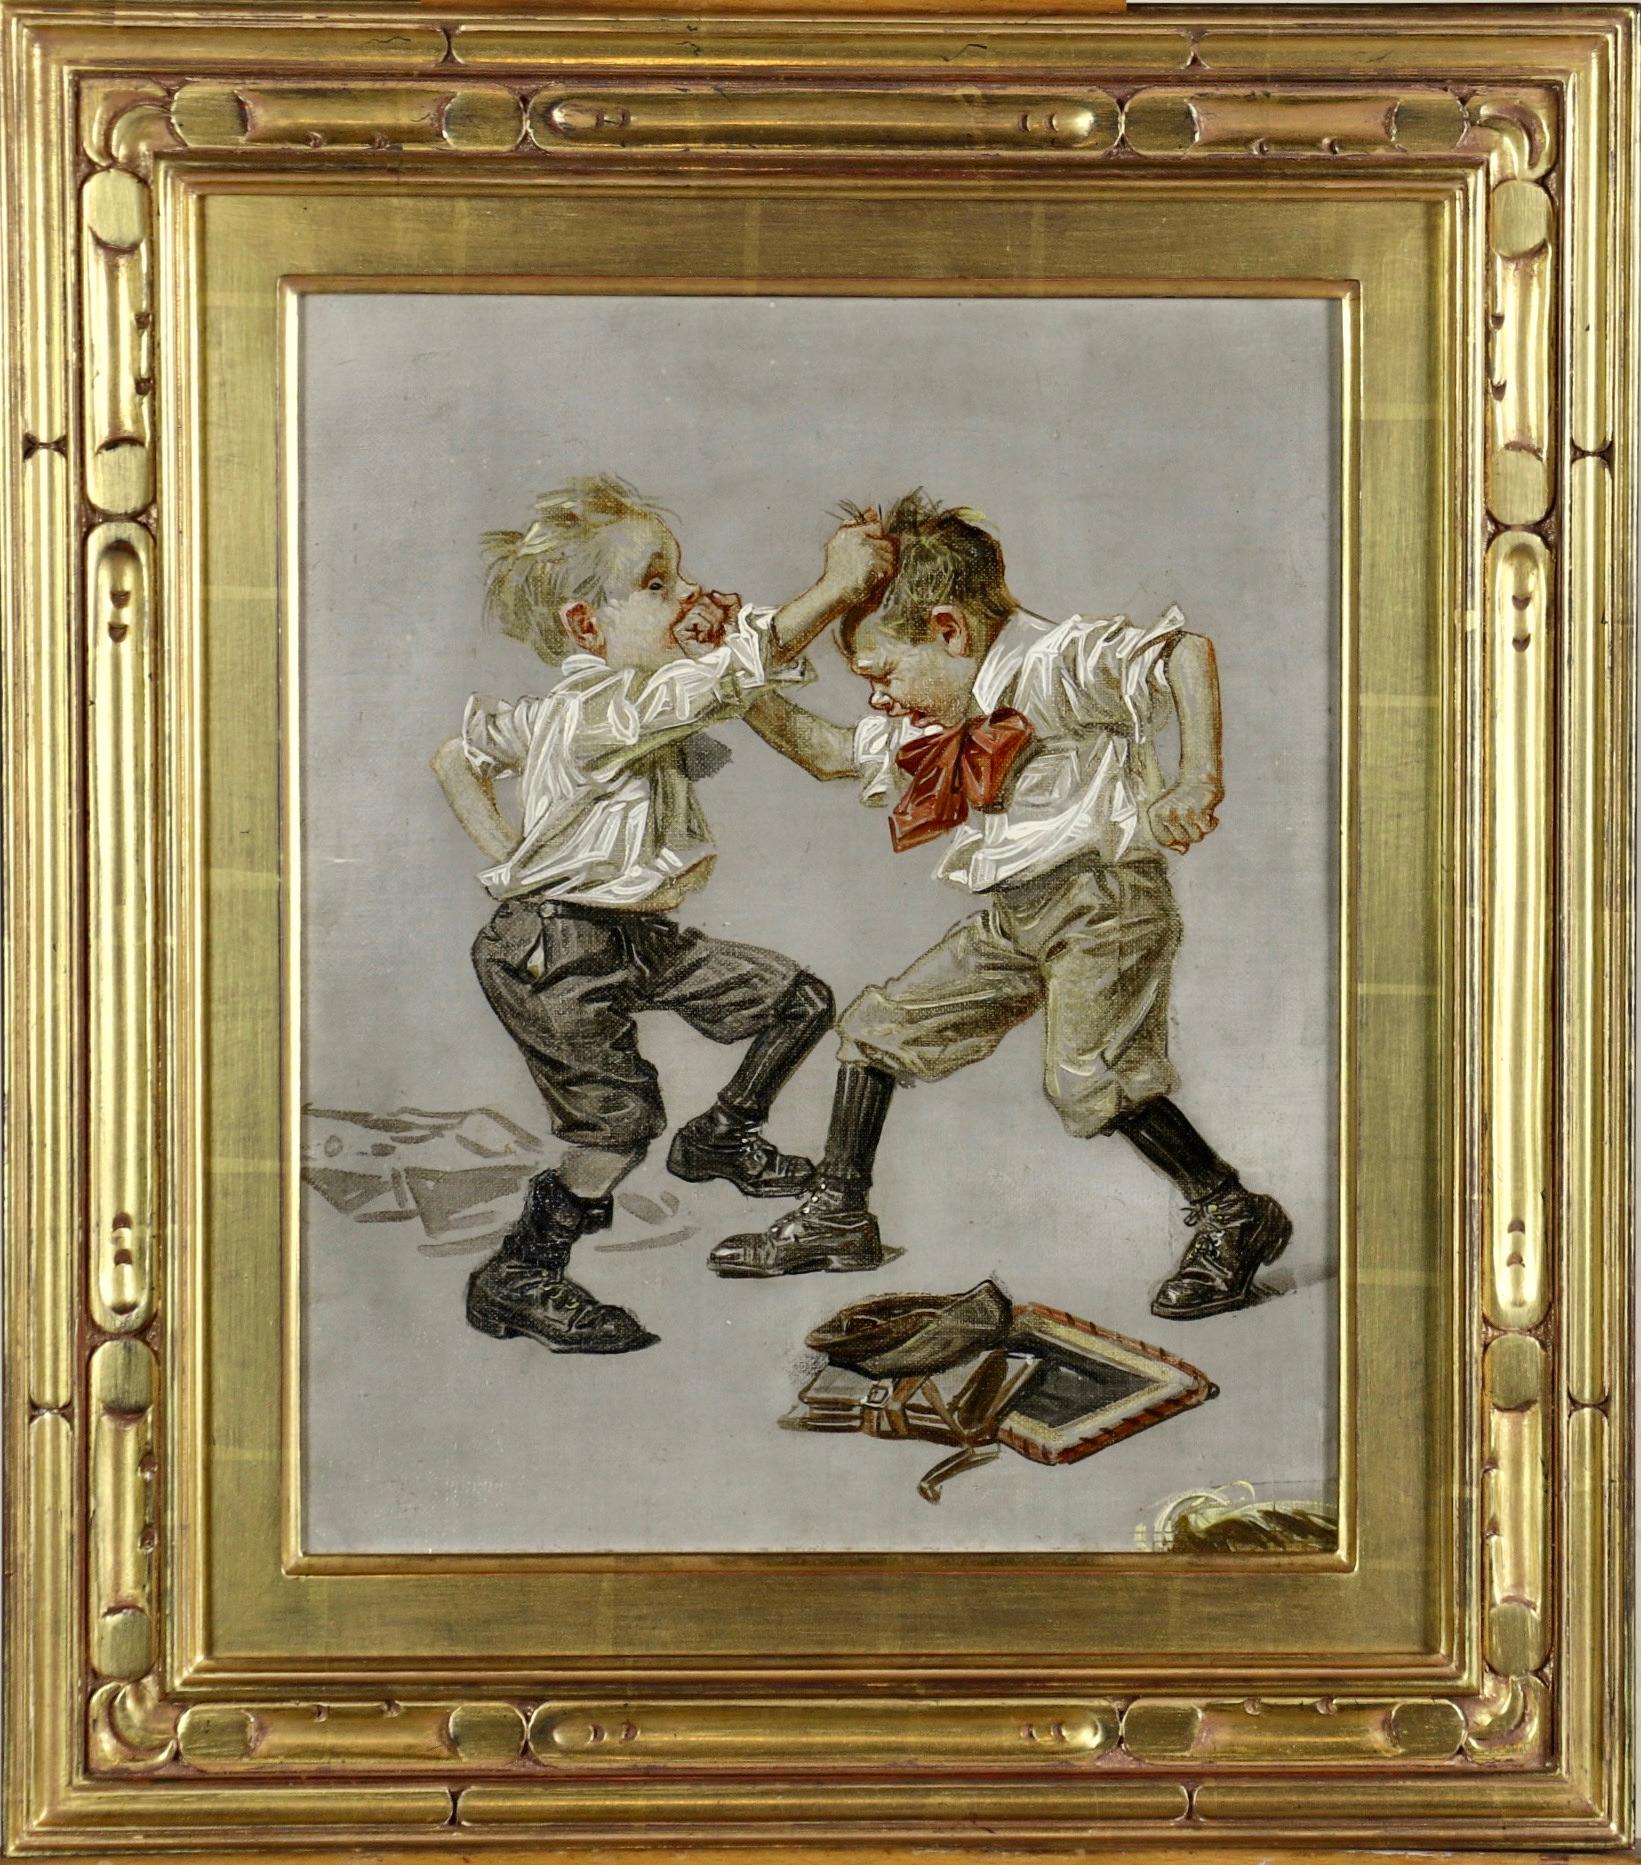 Joseph Christian Leyendecker Figurative Painting - Fight Between Two Boys, Saturday Evening Post cover study